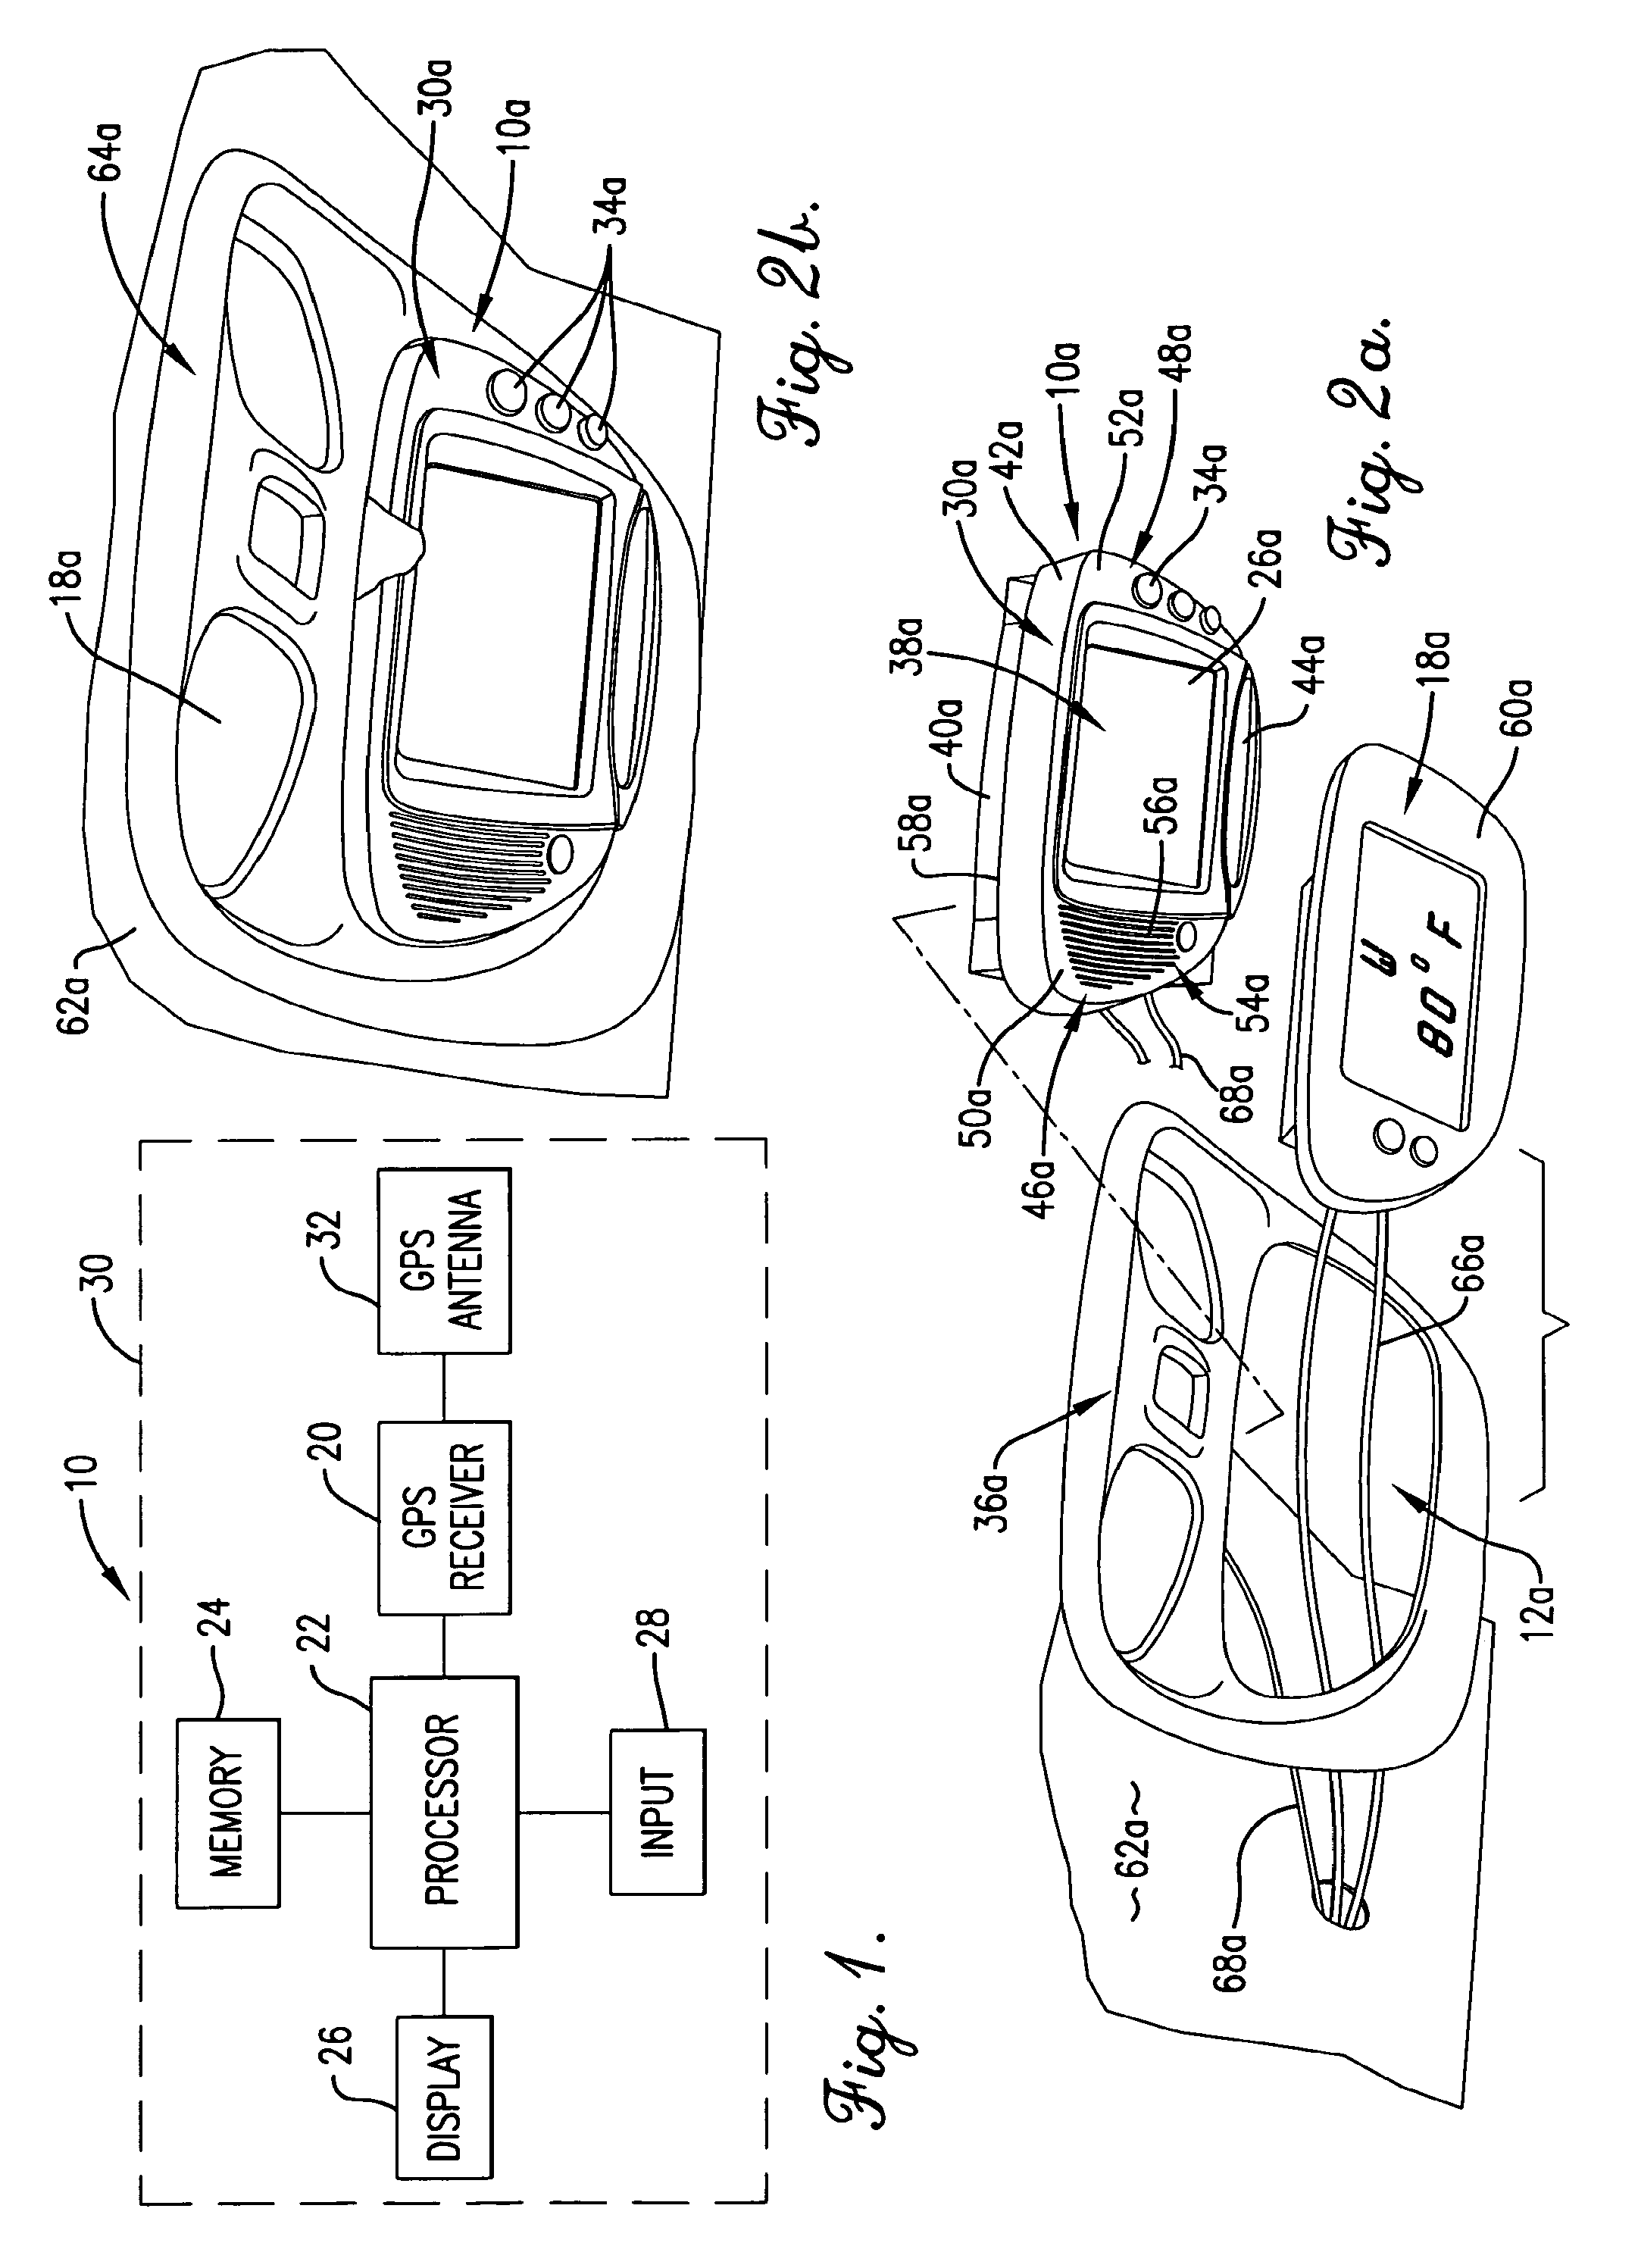 Navigational device for installation in a vehicle and a method for doing same